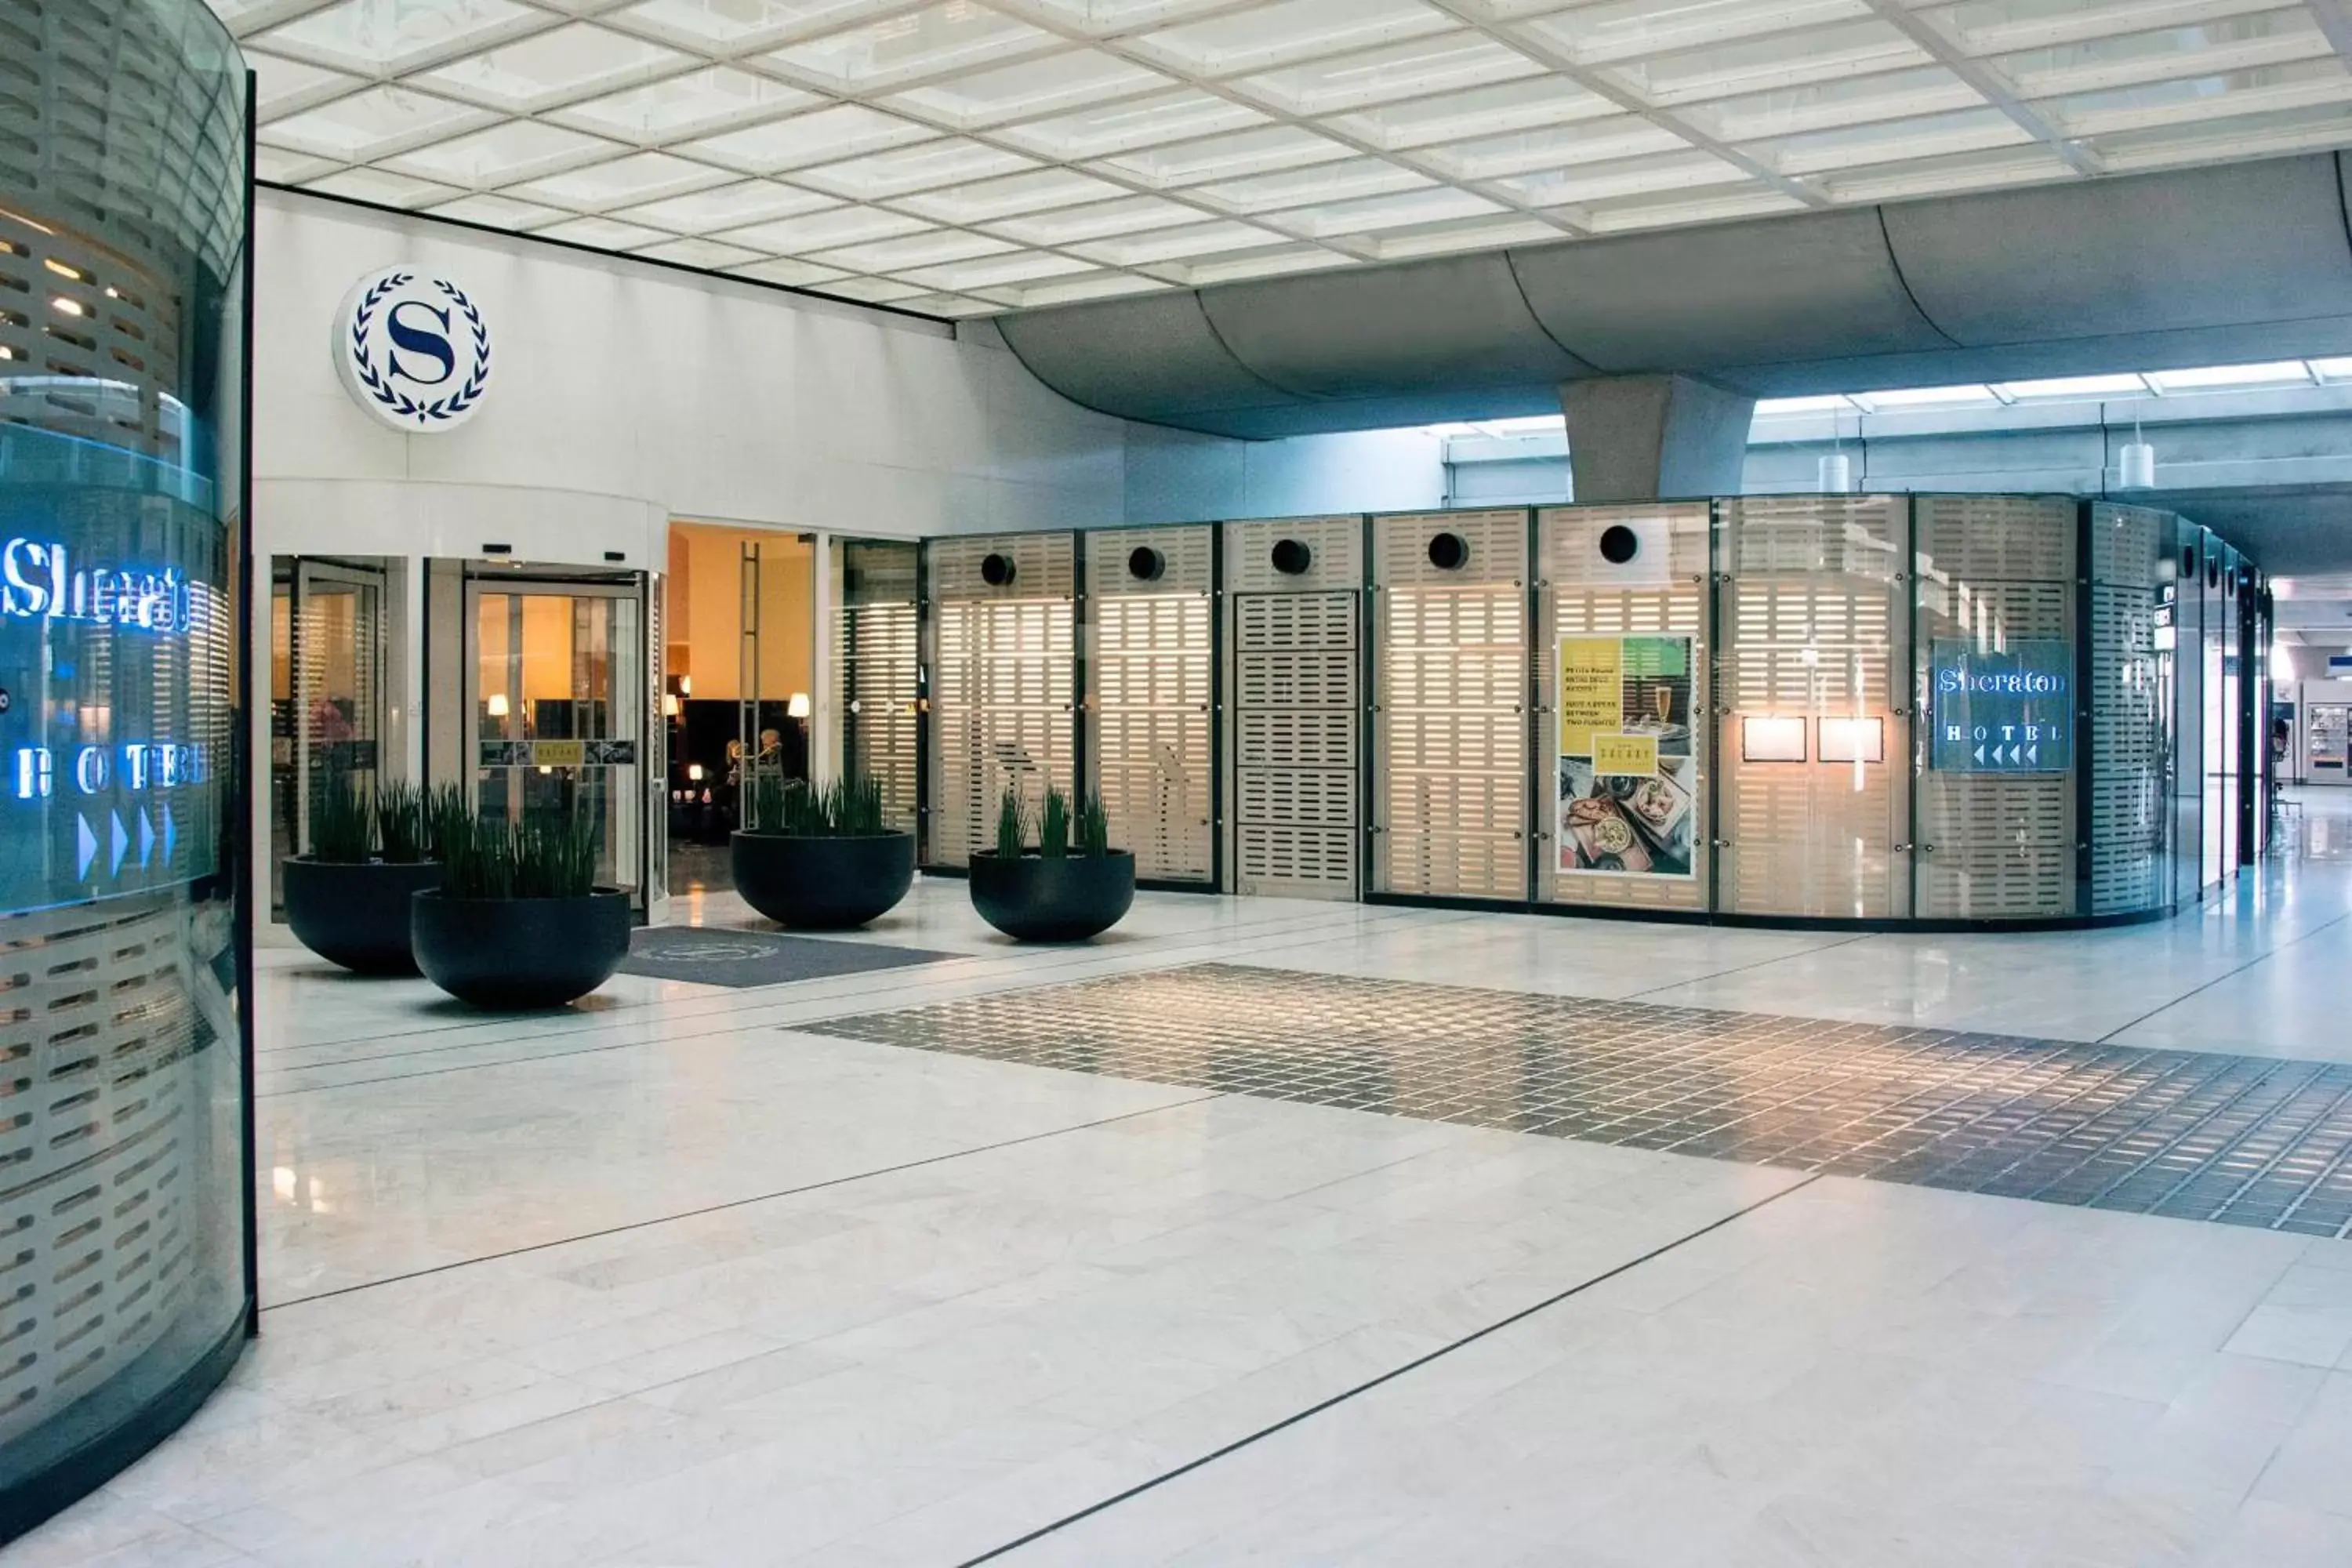 Property building in Sheraton Paris Charles de Gaulle Airport Hotel